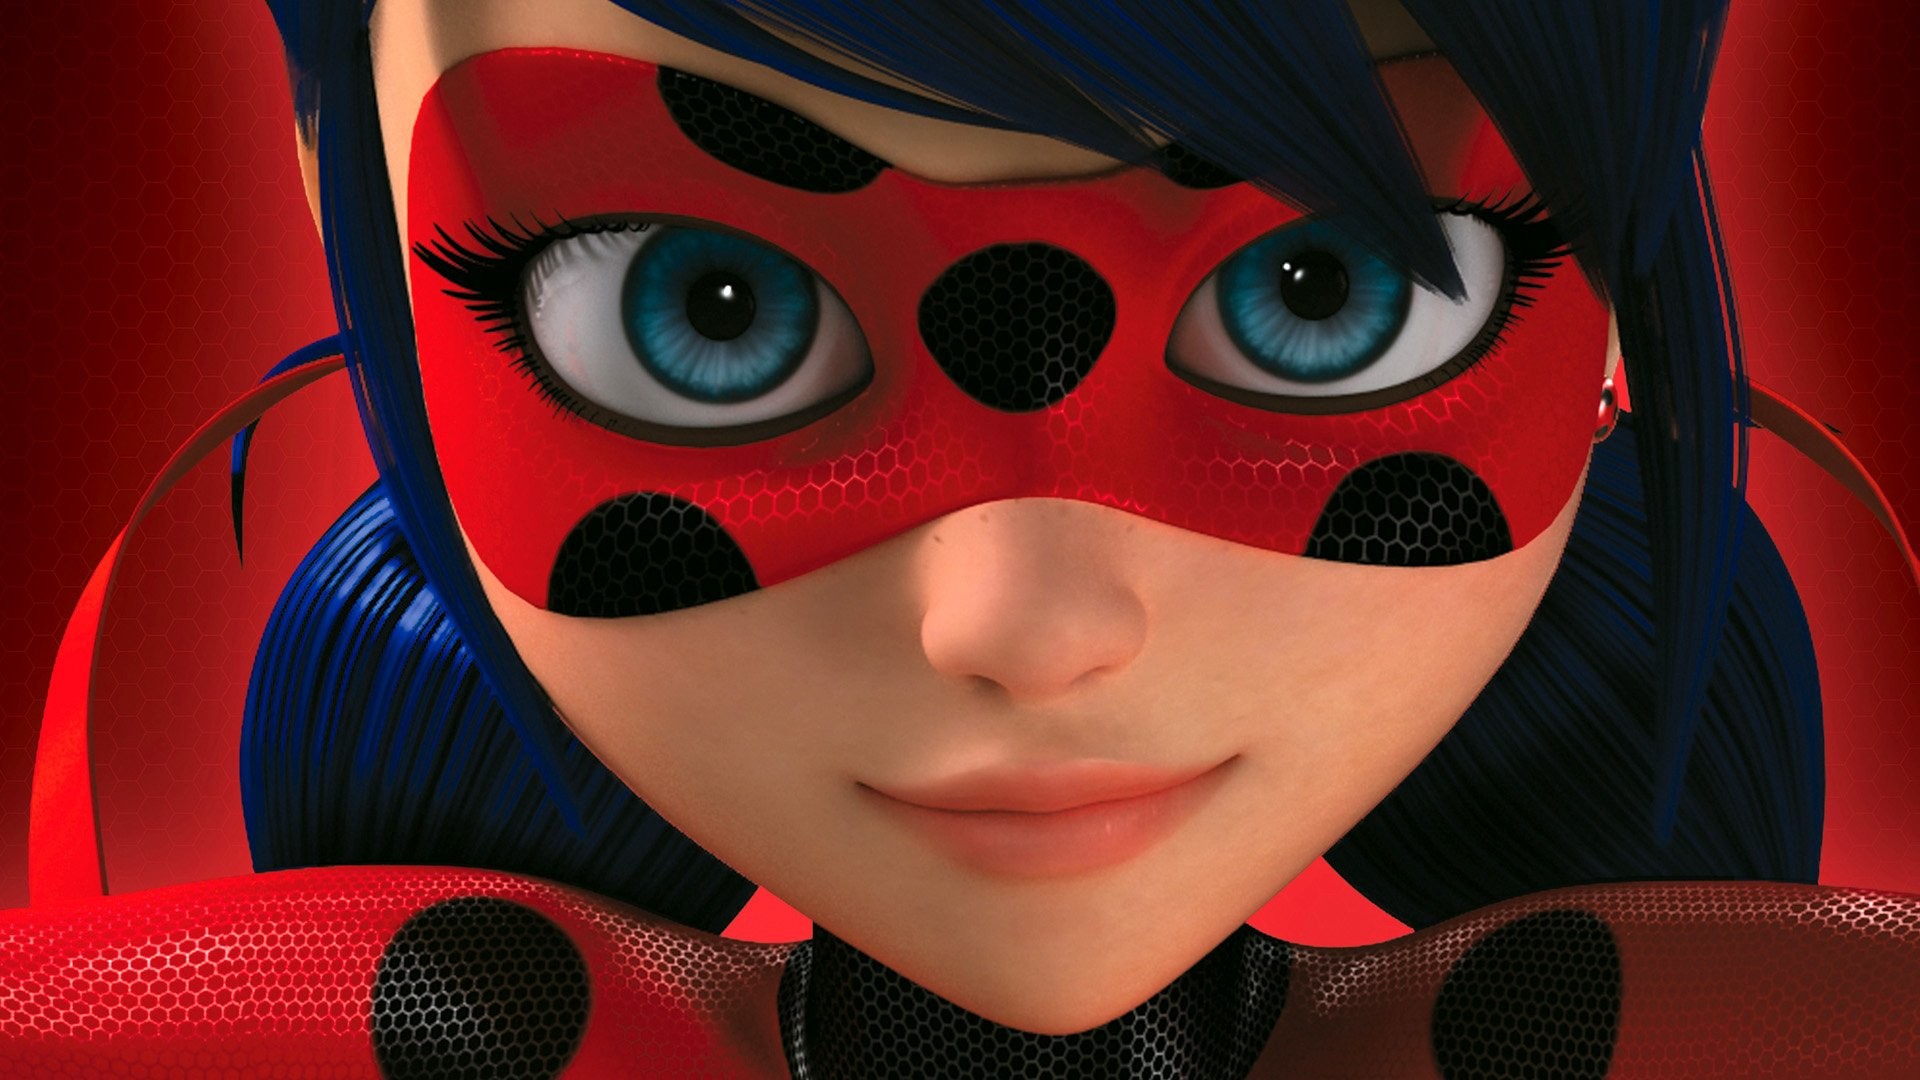 1920x1080 Zeichentrick - Miraculous: Tales of Ladybug & Cat Noir Ladybug (Miraculous  Ladybug) Wallpaper